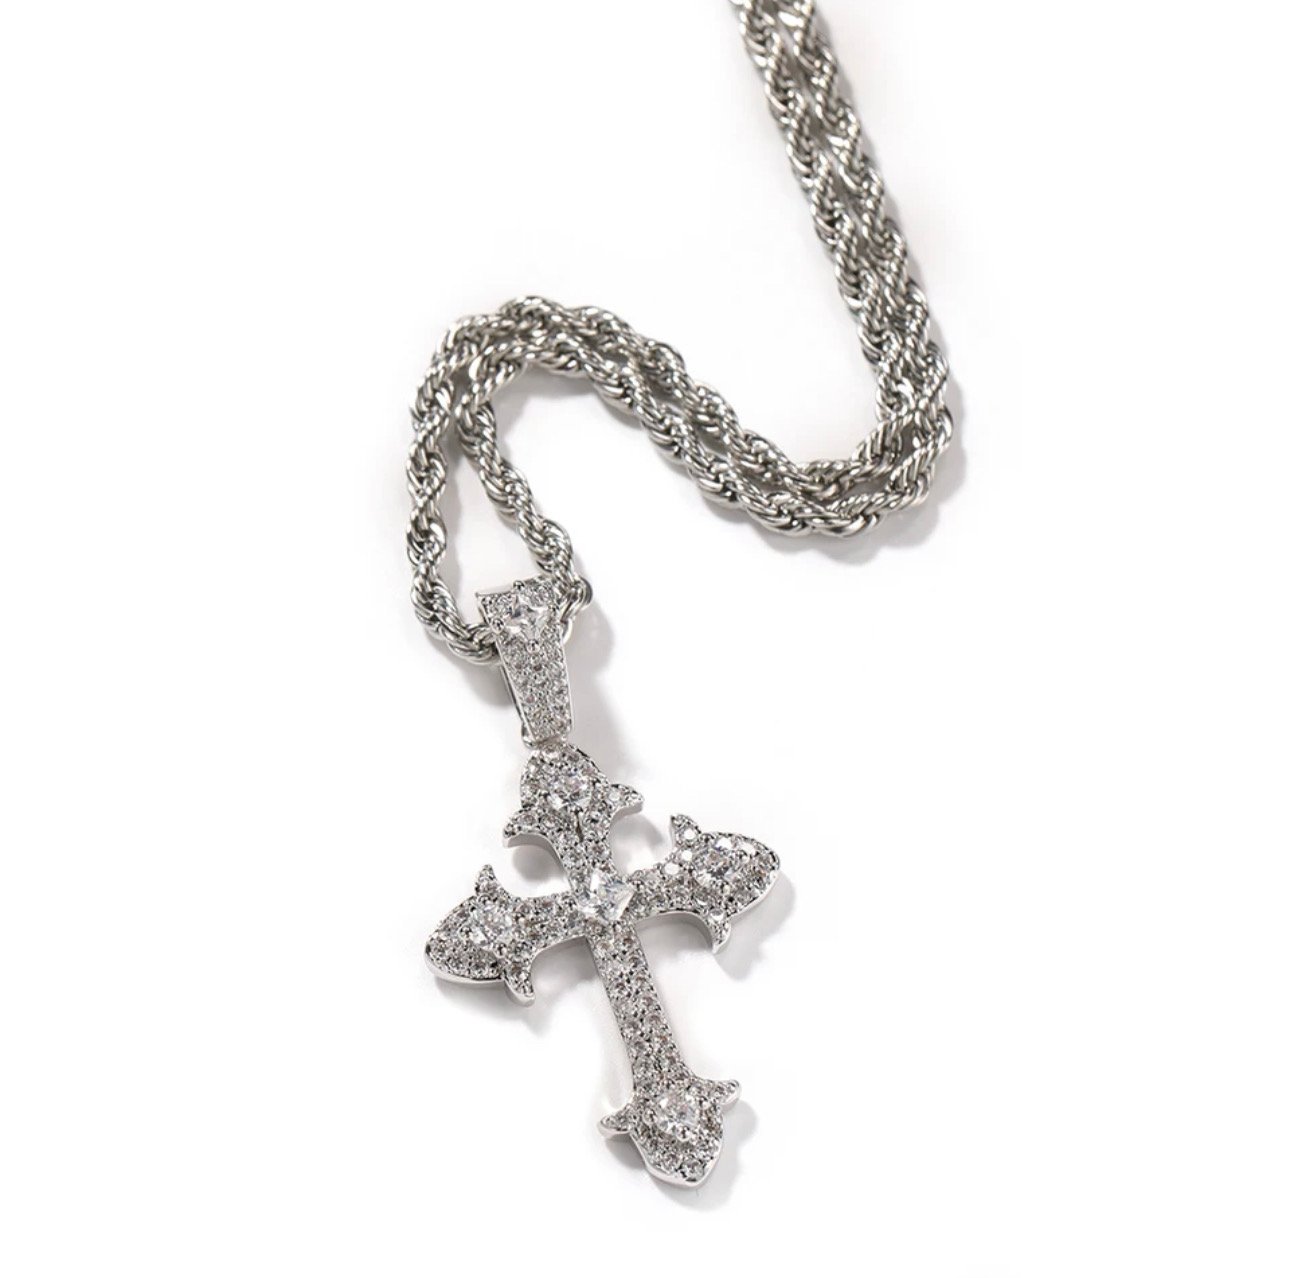 USED】VINTAGE CROSS Necklace - ネックレス